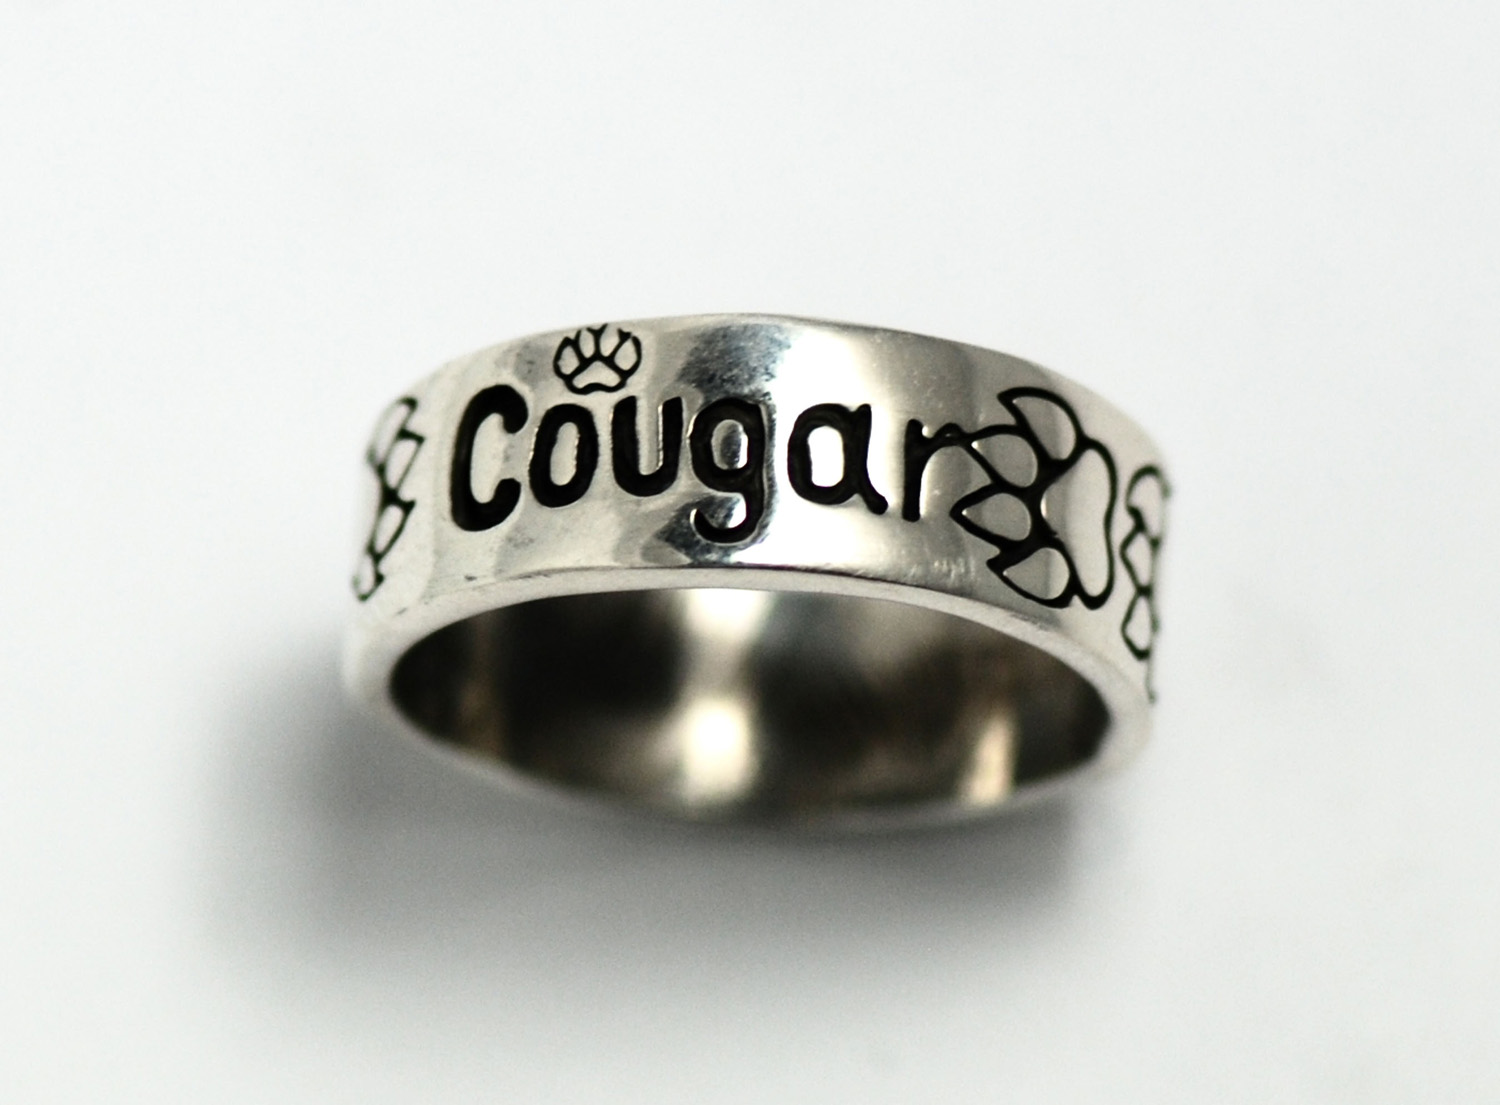 Cougar Ring: Jewelry of the Moment